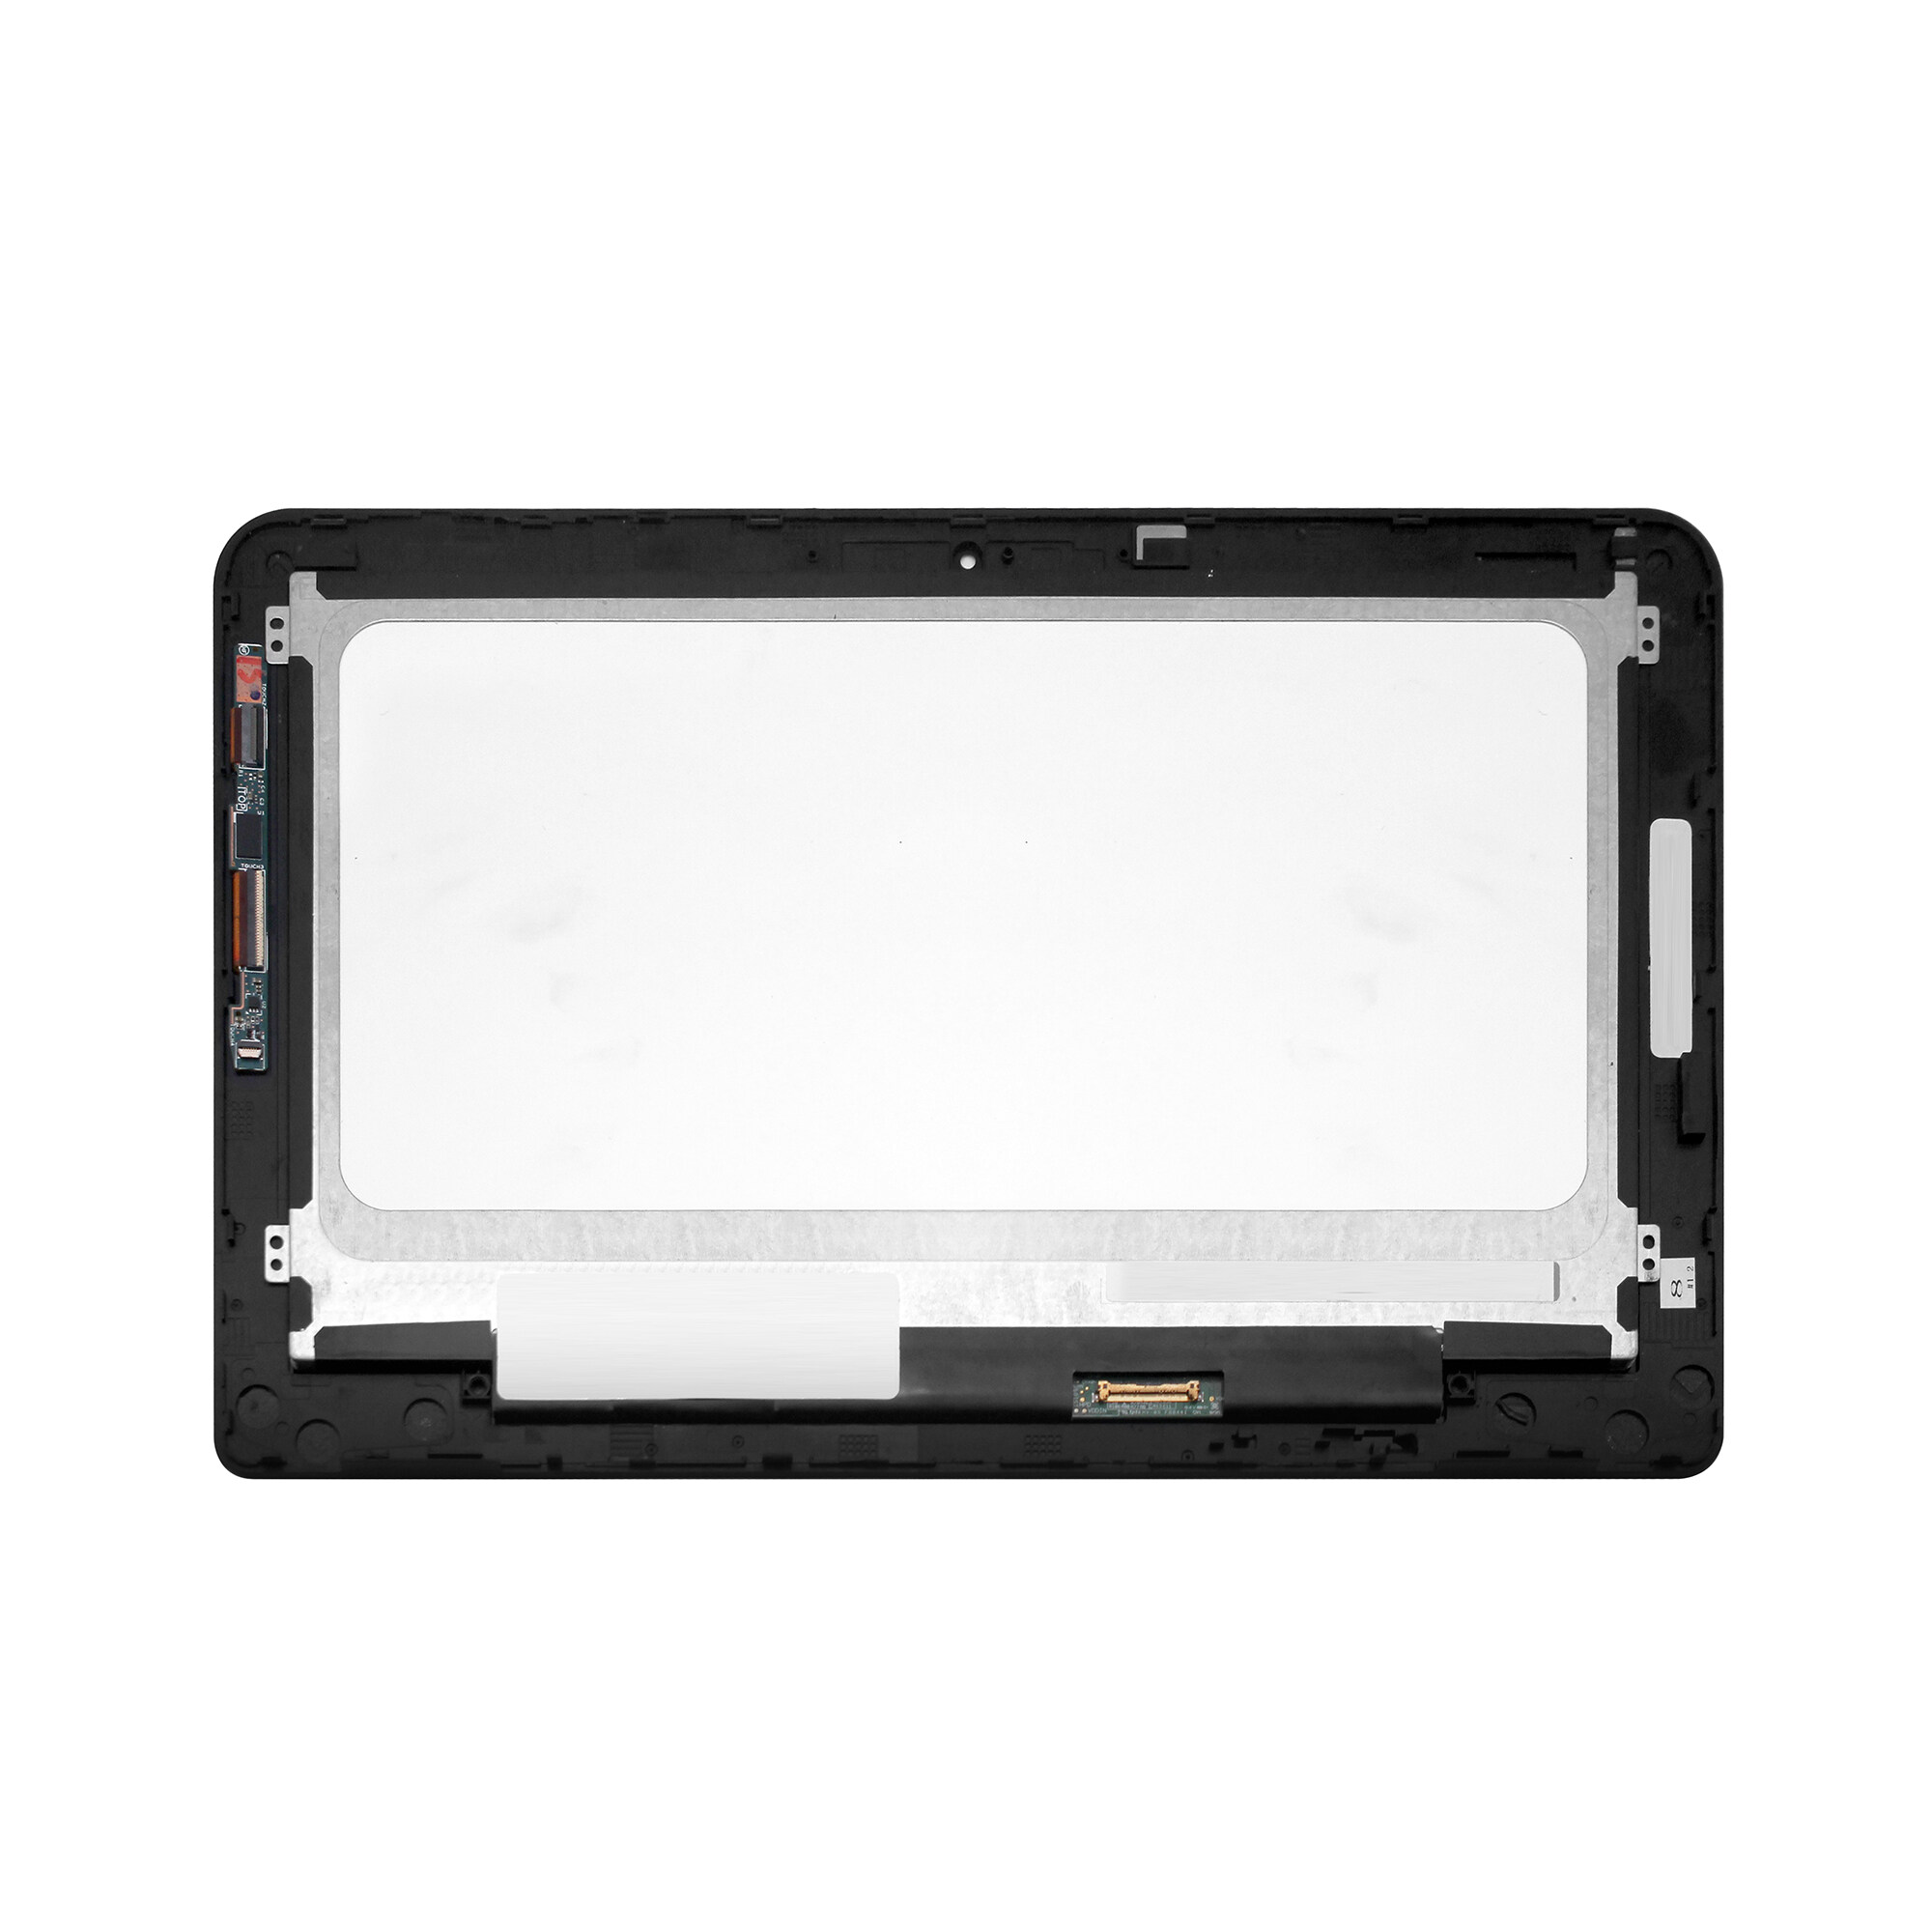 11.6" LED LCD Touch Screen Dispaly Assembly For HP Pavilion X360 11-K Series